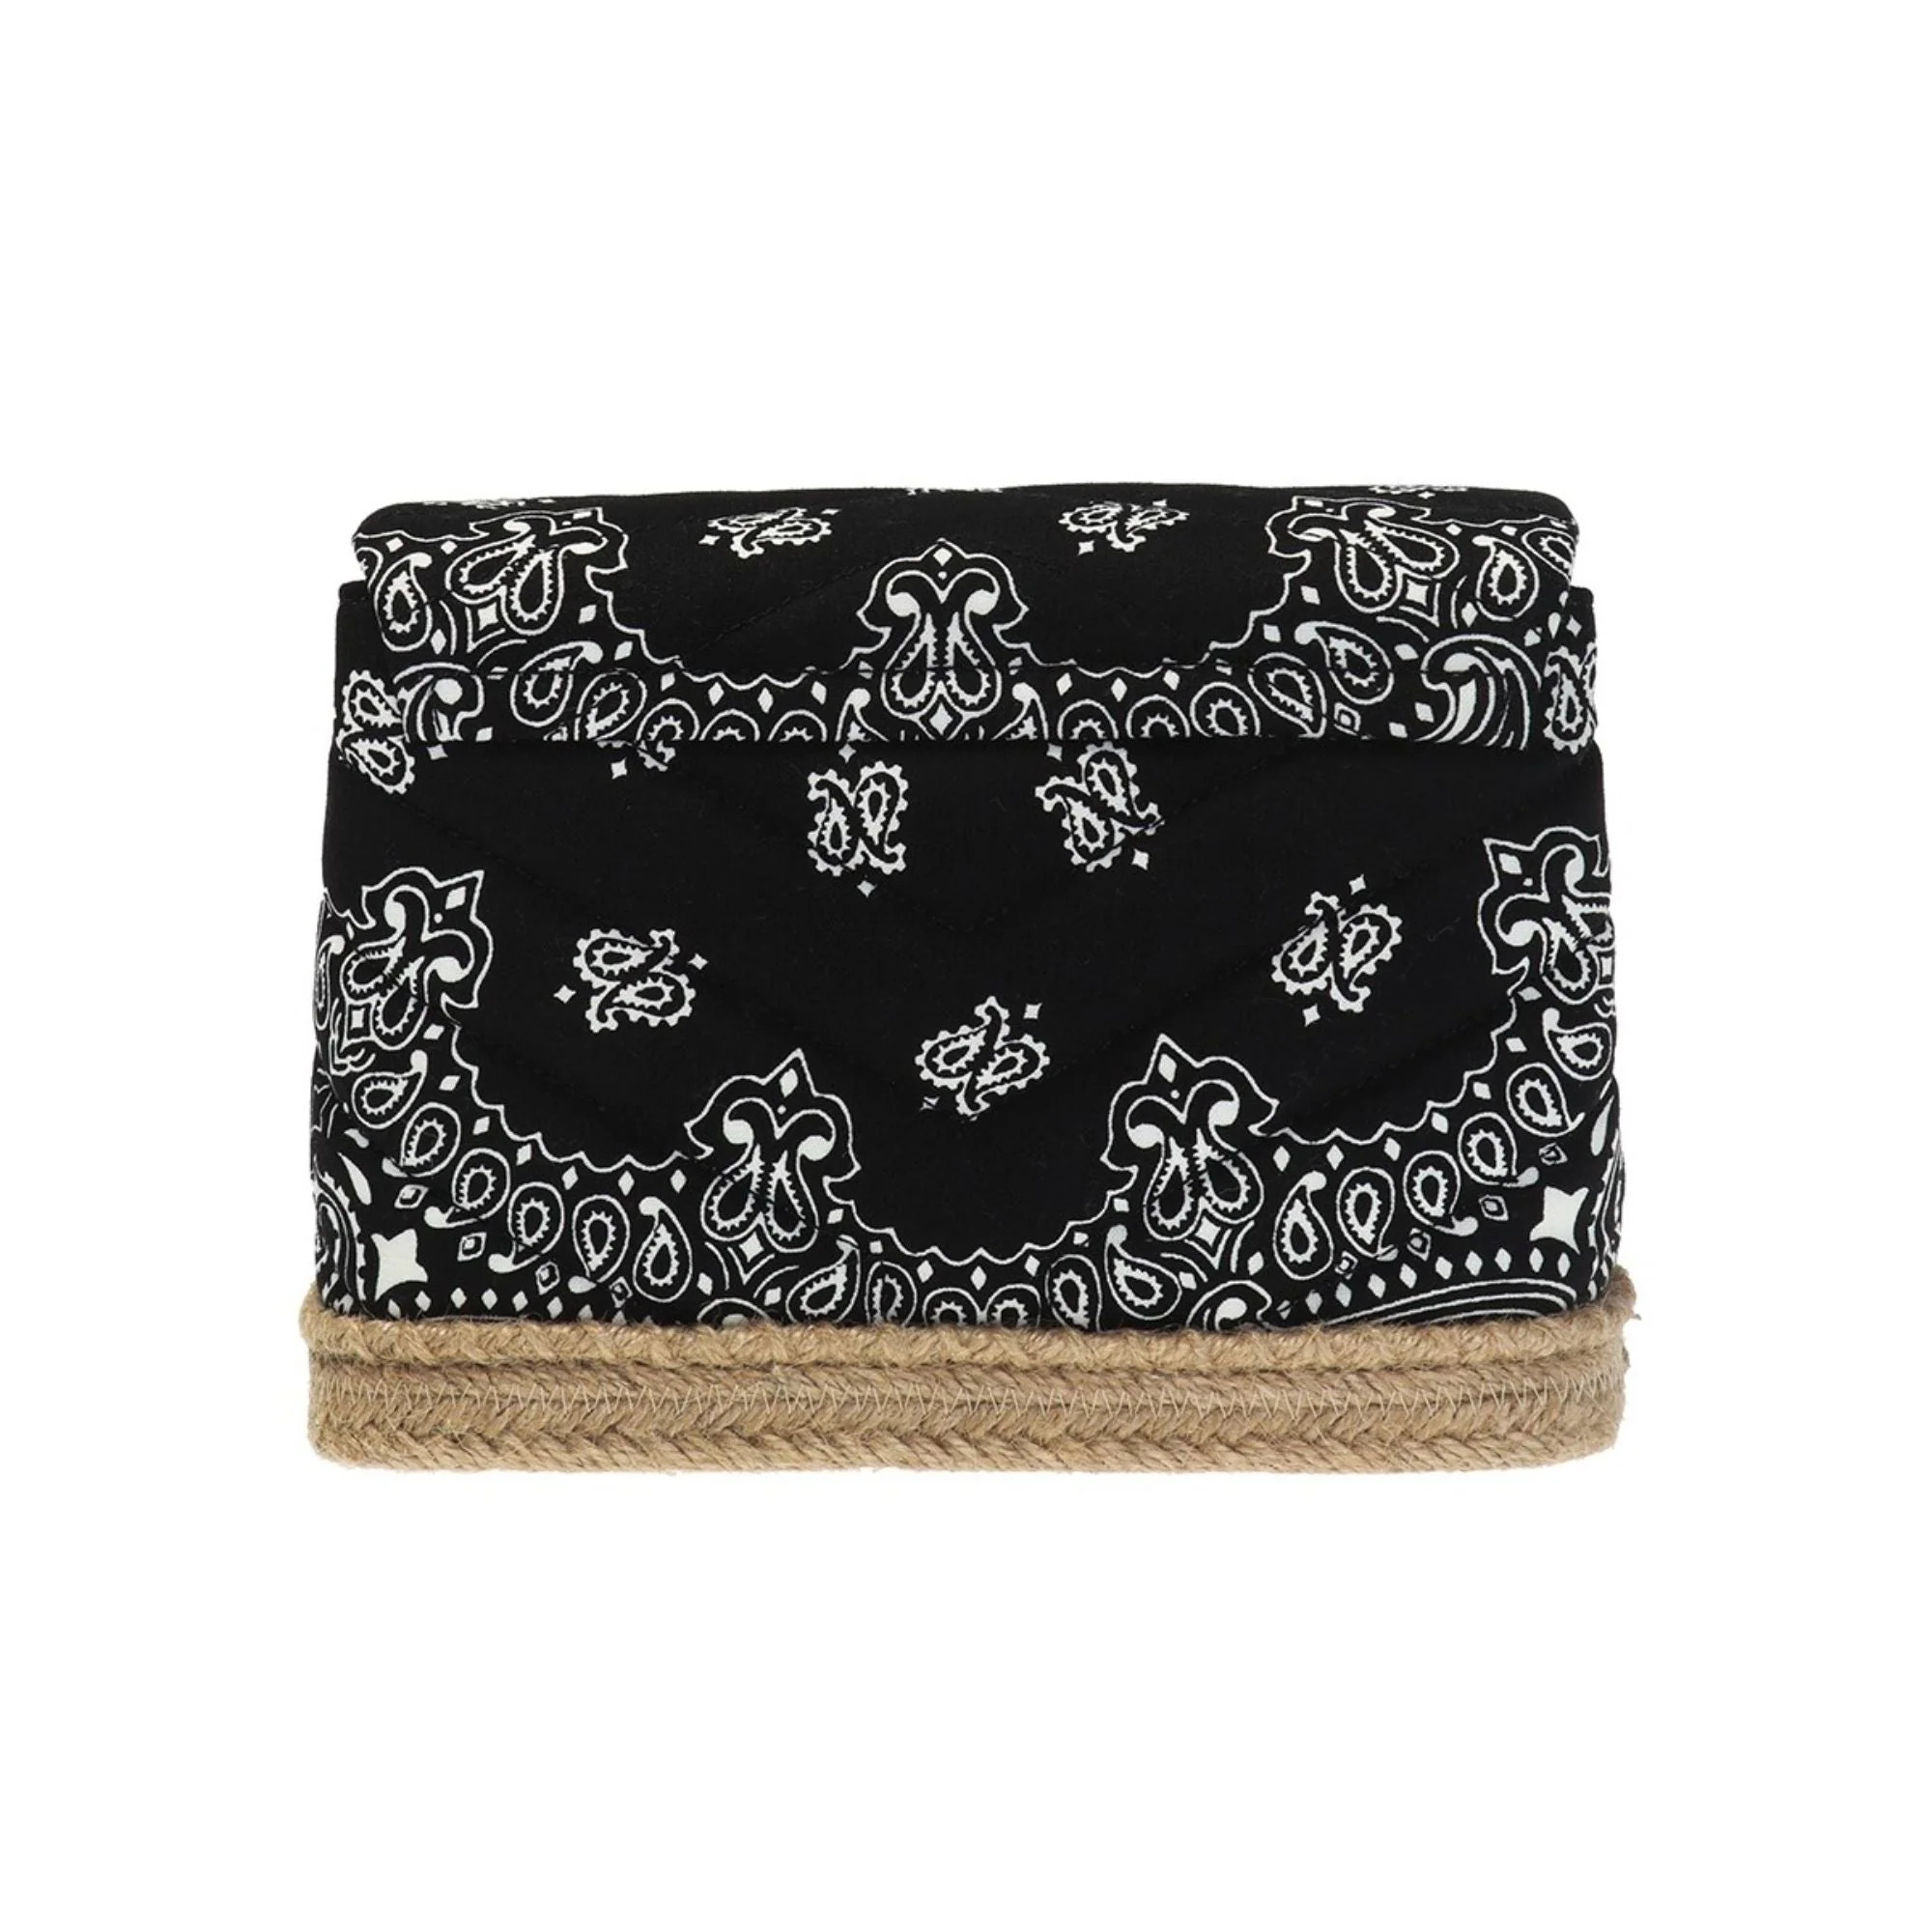 Saint Laurent Loulou Black Paisley Quilted Small Cross Body Bag 531045 - image 3 of 8